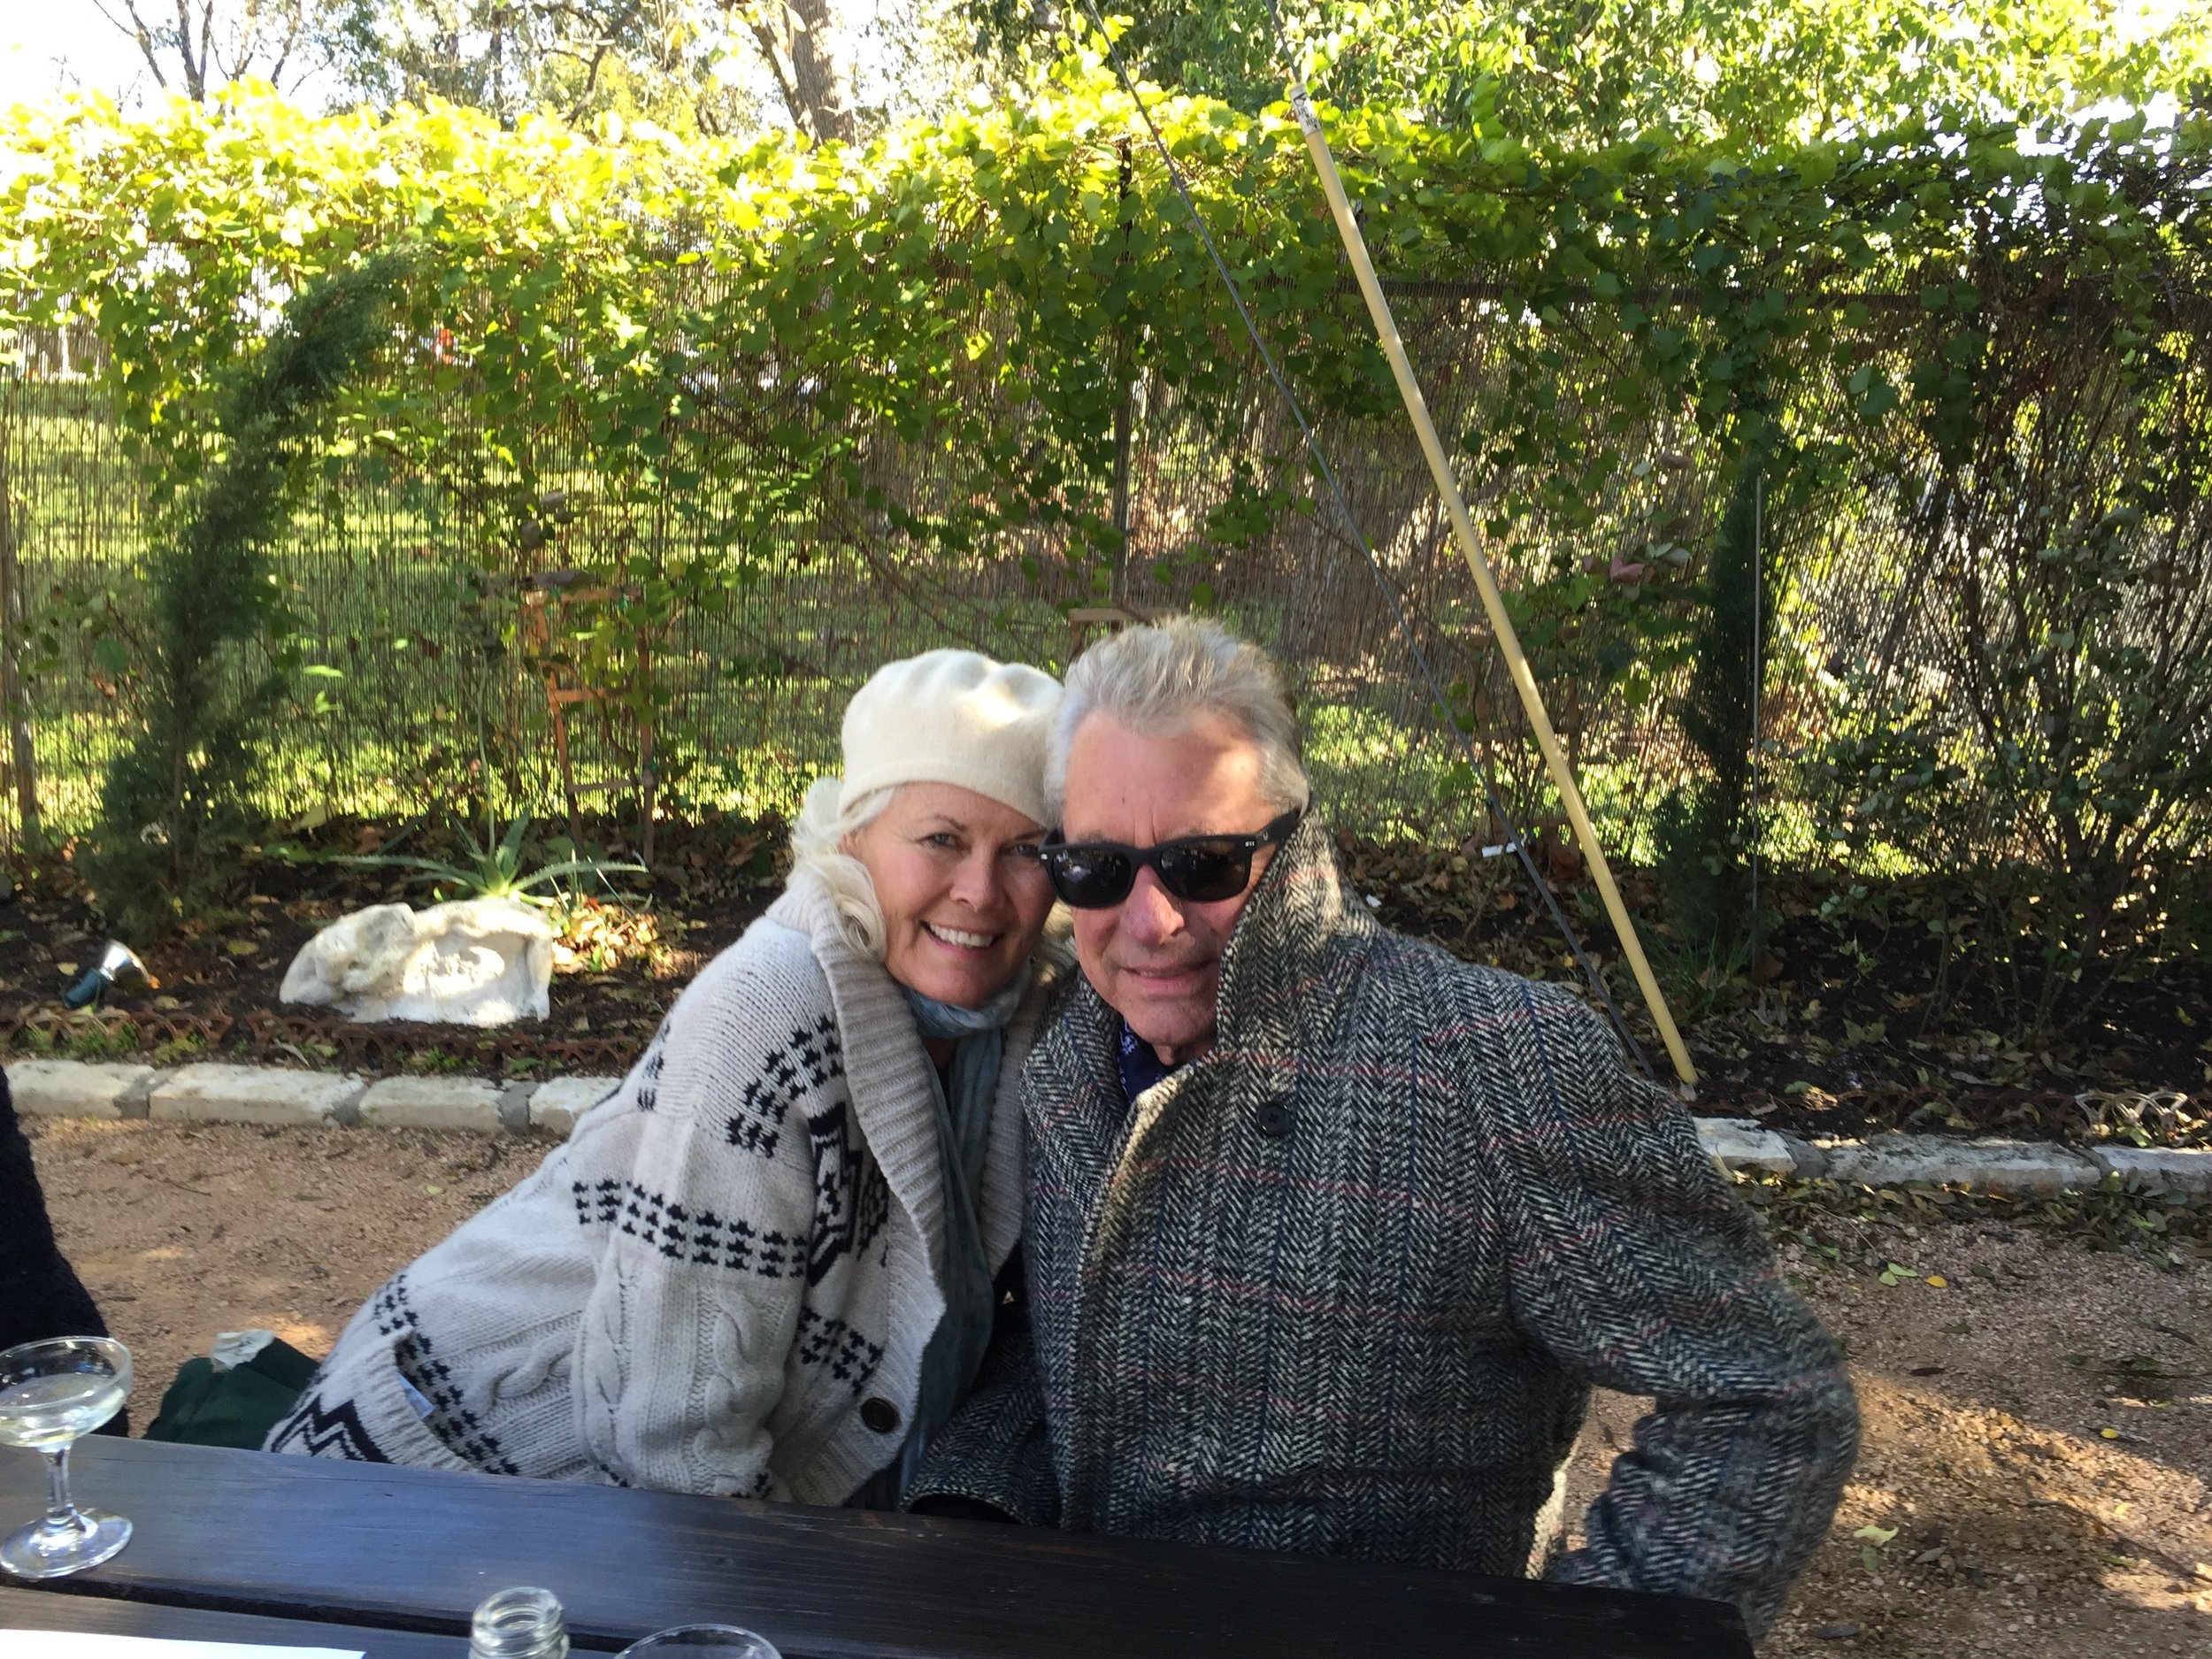 Sharon and Joe Ely in the garden at Justine’s in Austin.